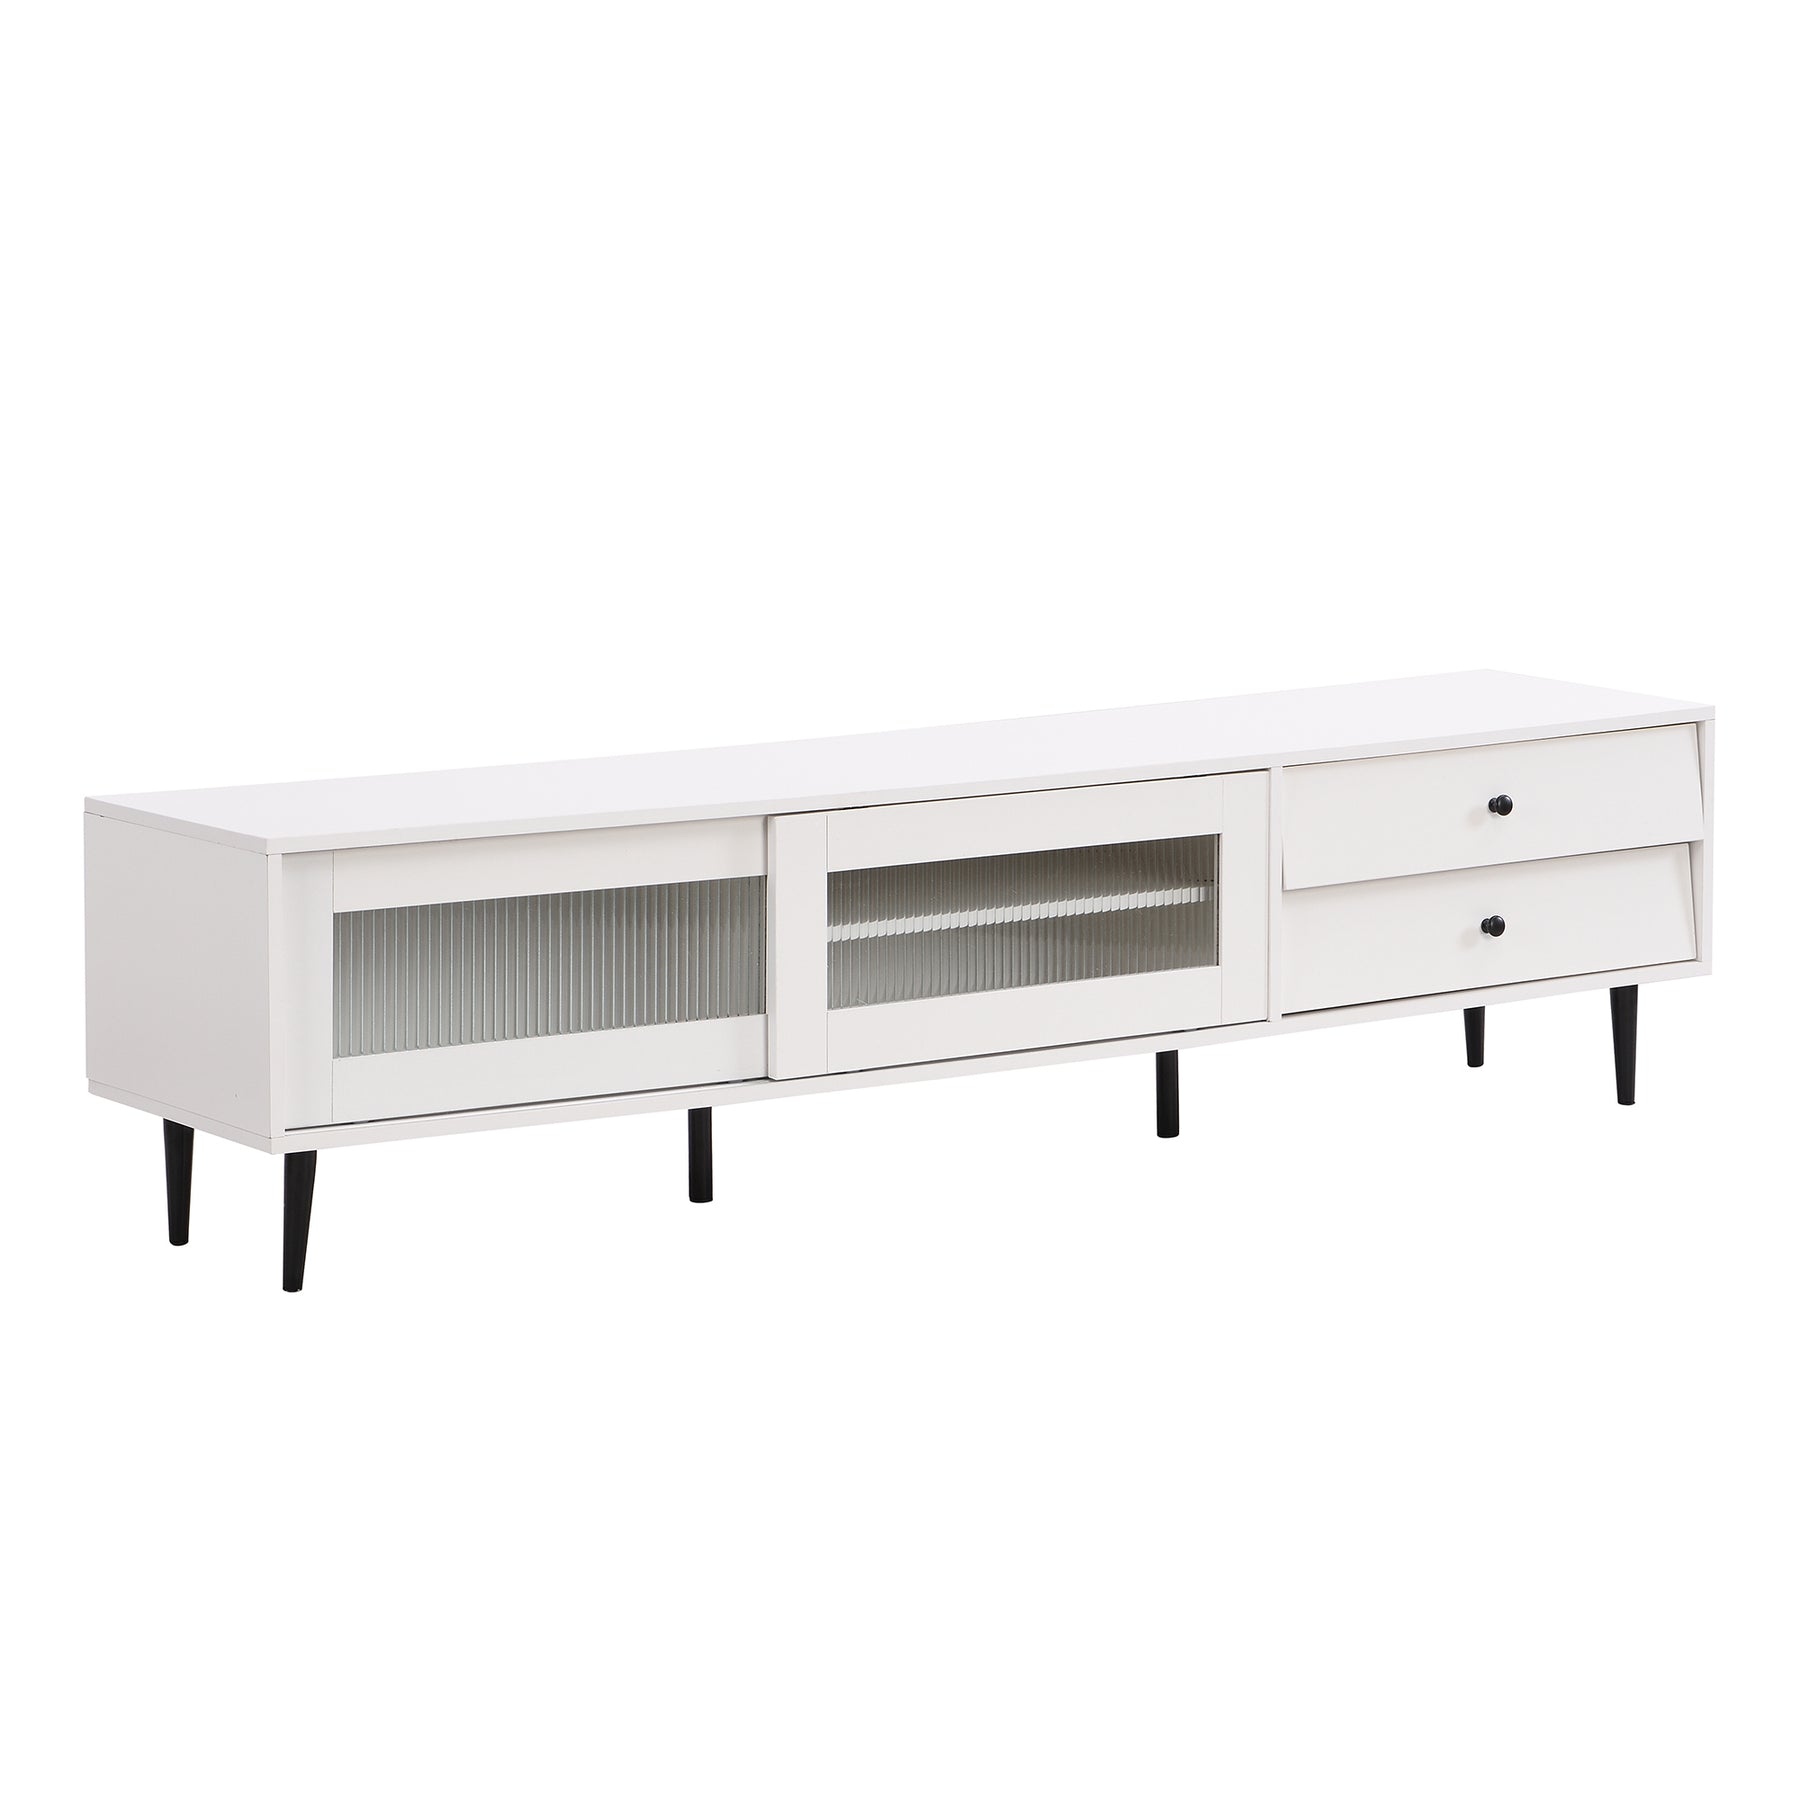 ON-TREND Chic Elegant Design TV Stand with Sliding Fluted Glass Doors, Slanted Drawers Media Console for TVs Up to 75", Modern TV Cabinet with Ample Storage Space, White - Tonkn